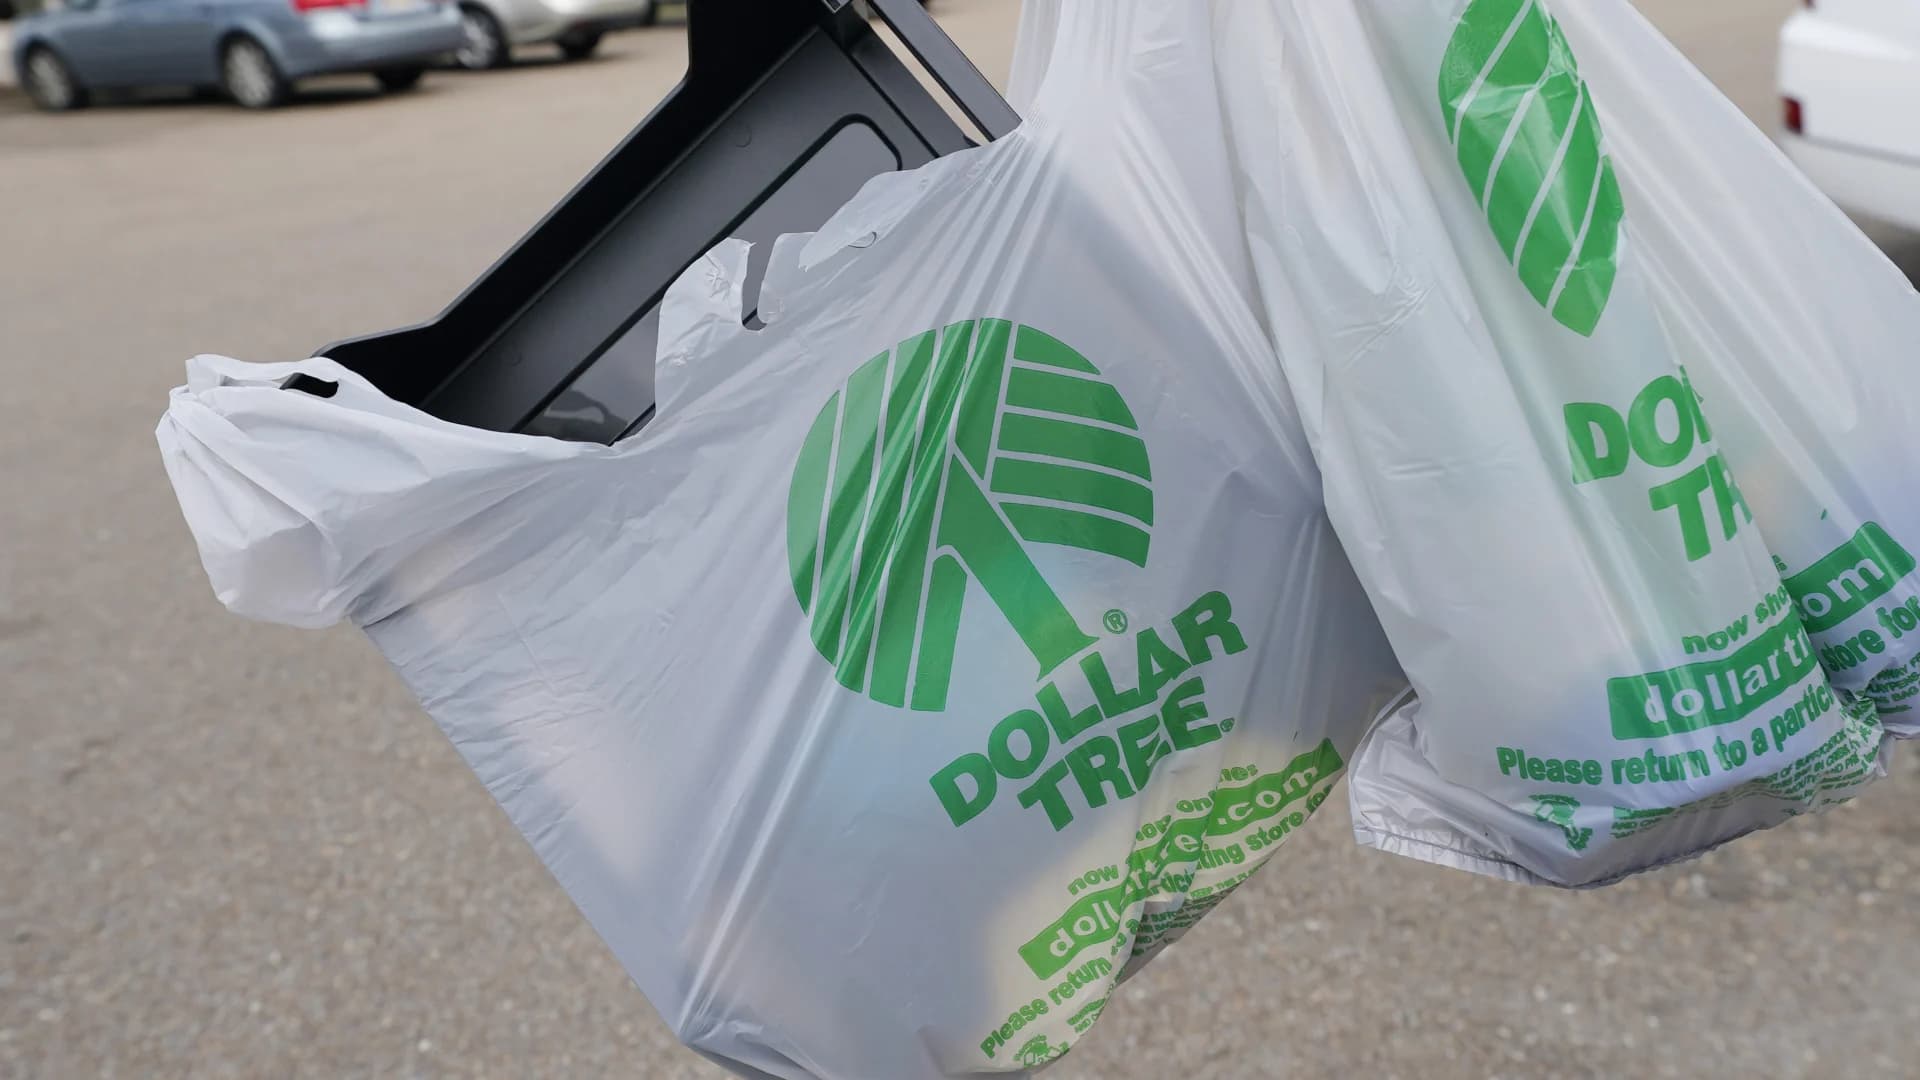 Dollar Tree to close nearly 1,000 stores